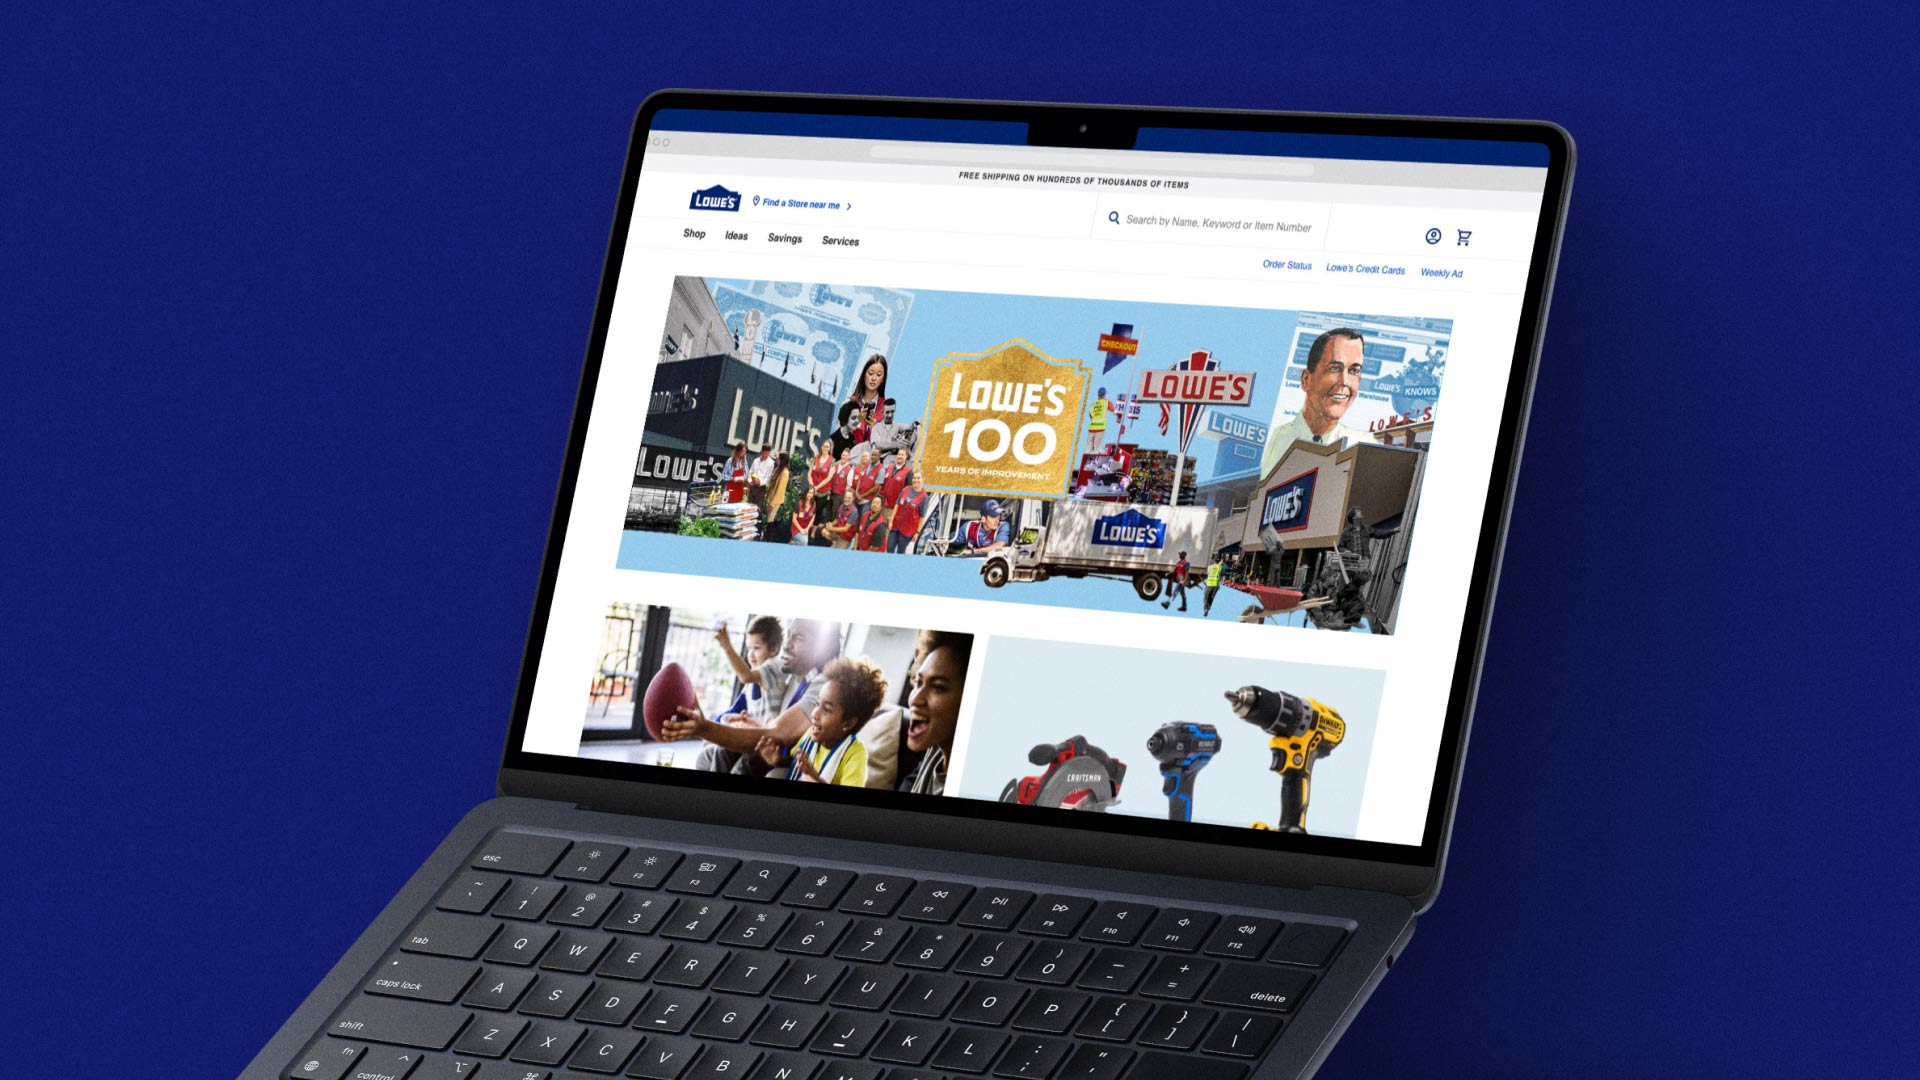 Blog post on Lowe's website featuring a Lowe's 100 graphic on a computer